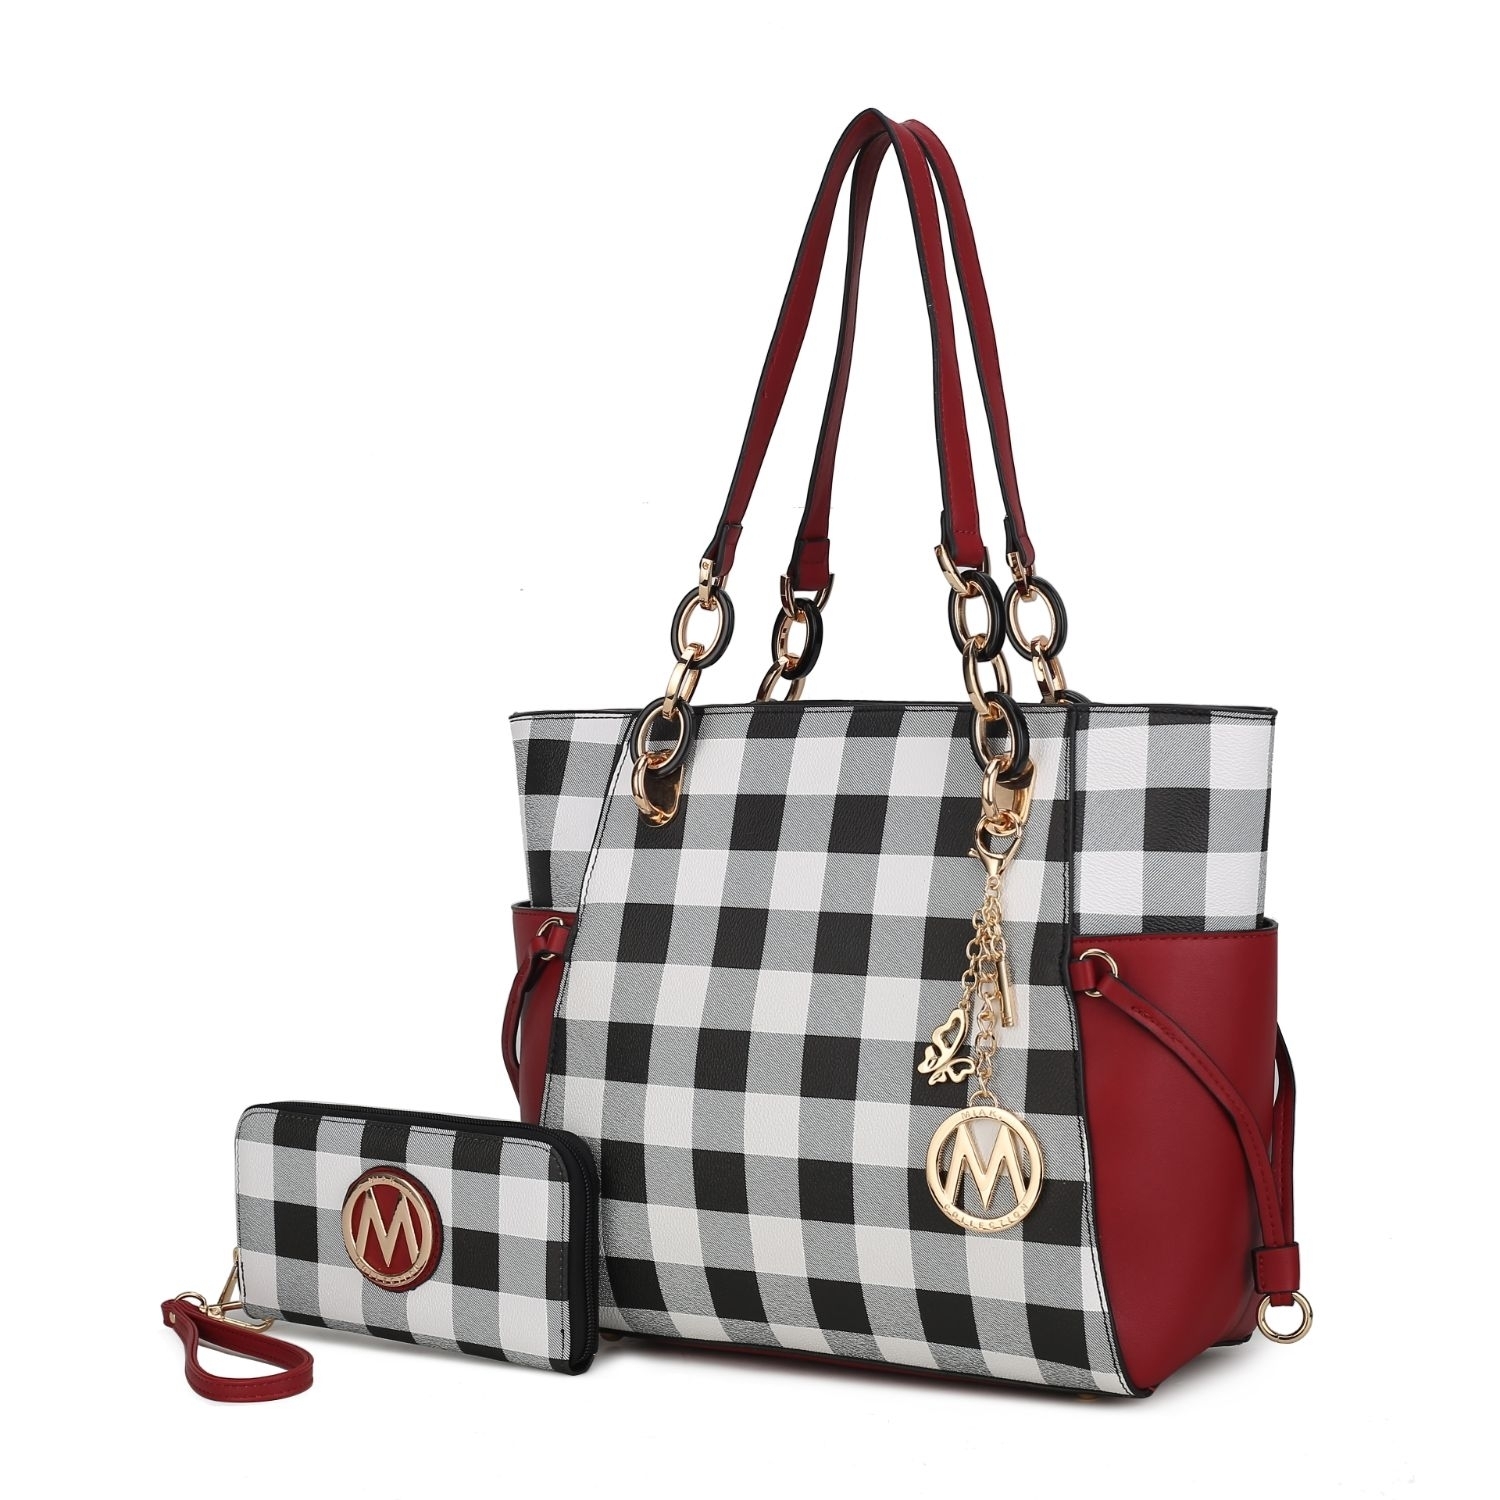 MKF Collection Yale Checkered Tote Handbag With Wallet By Mia K. - Red